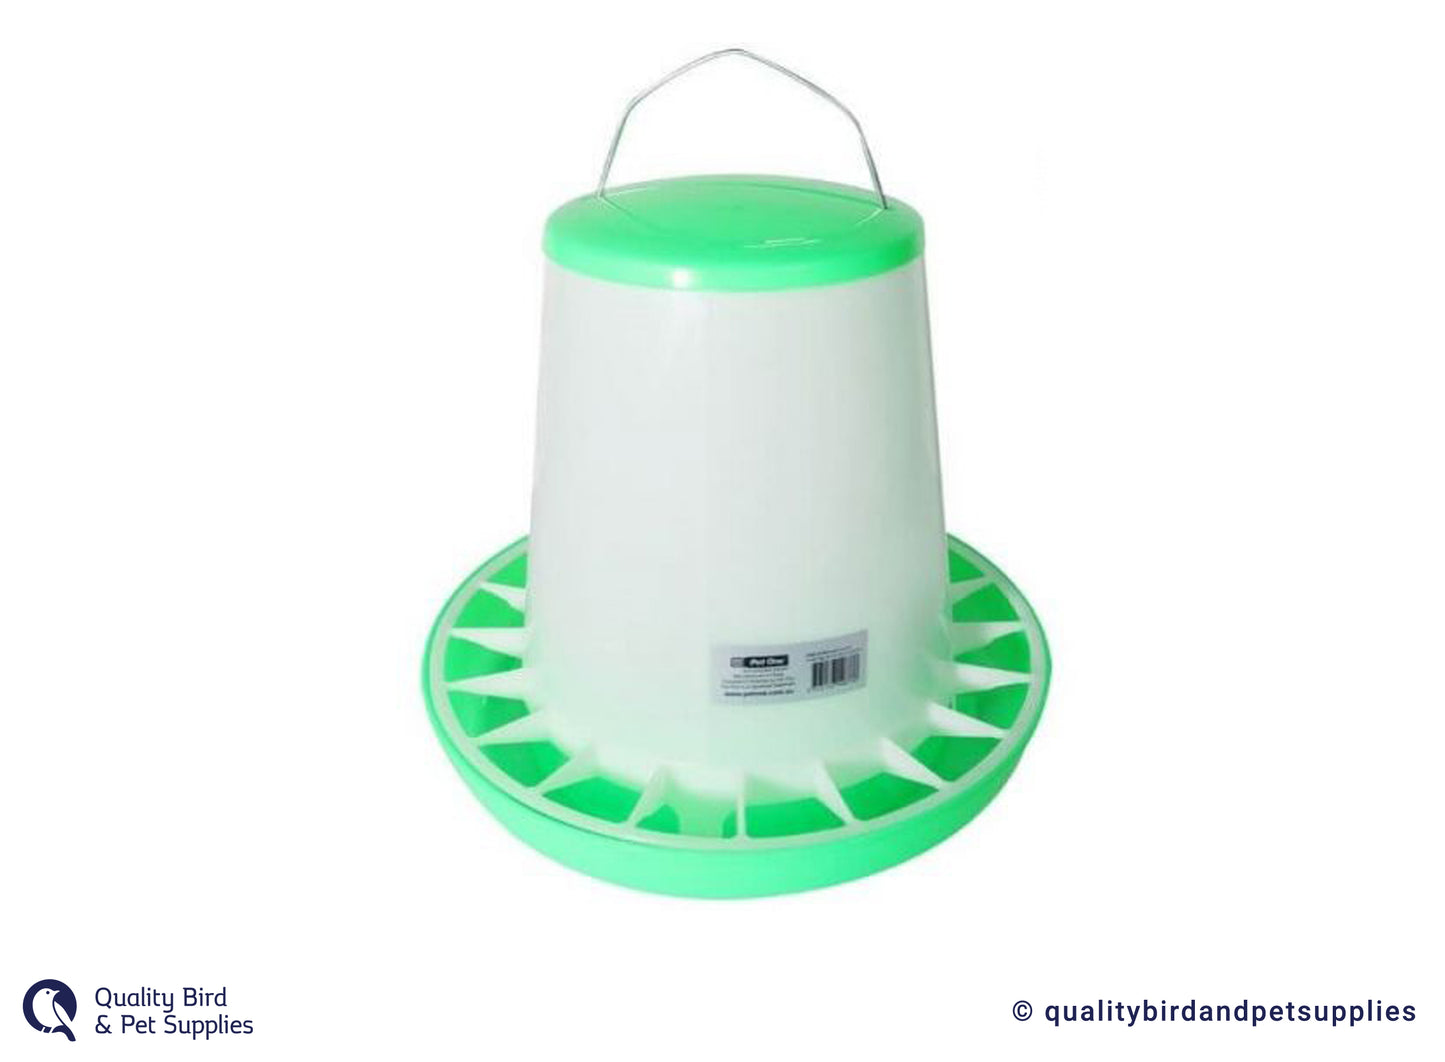 Pet One Poultry Gravity Feeders